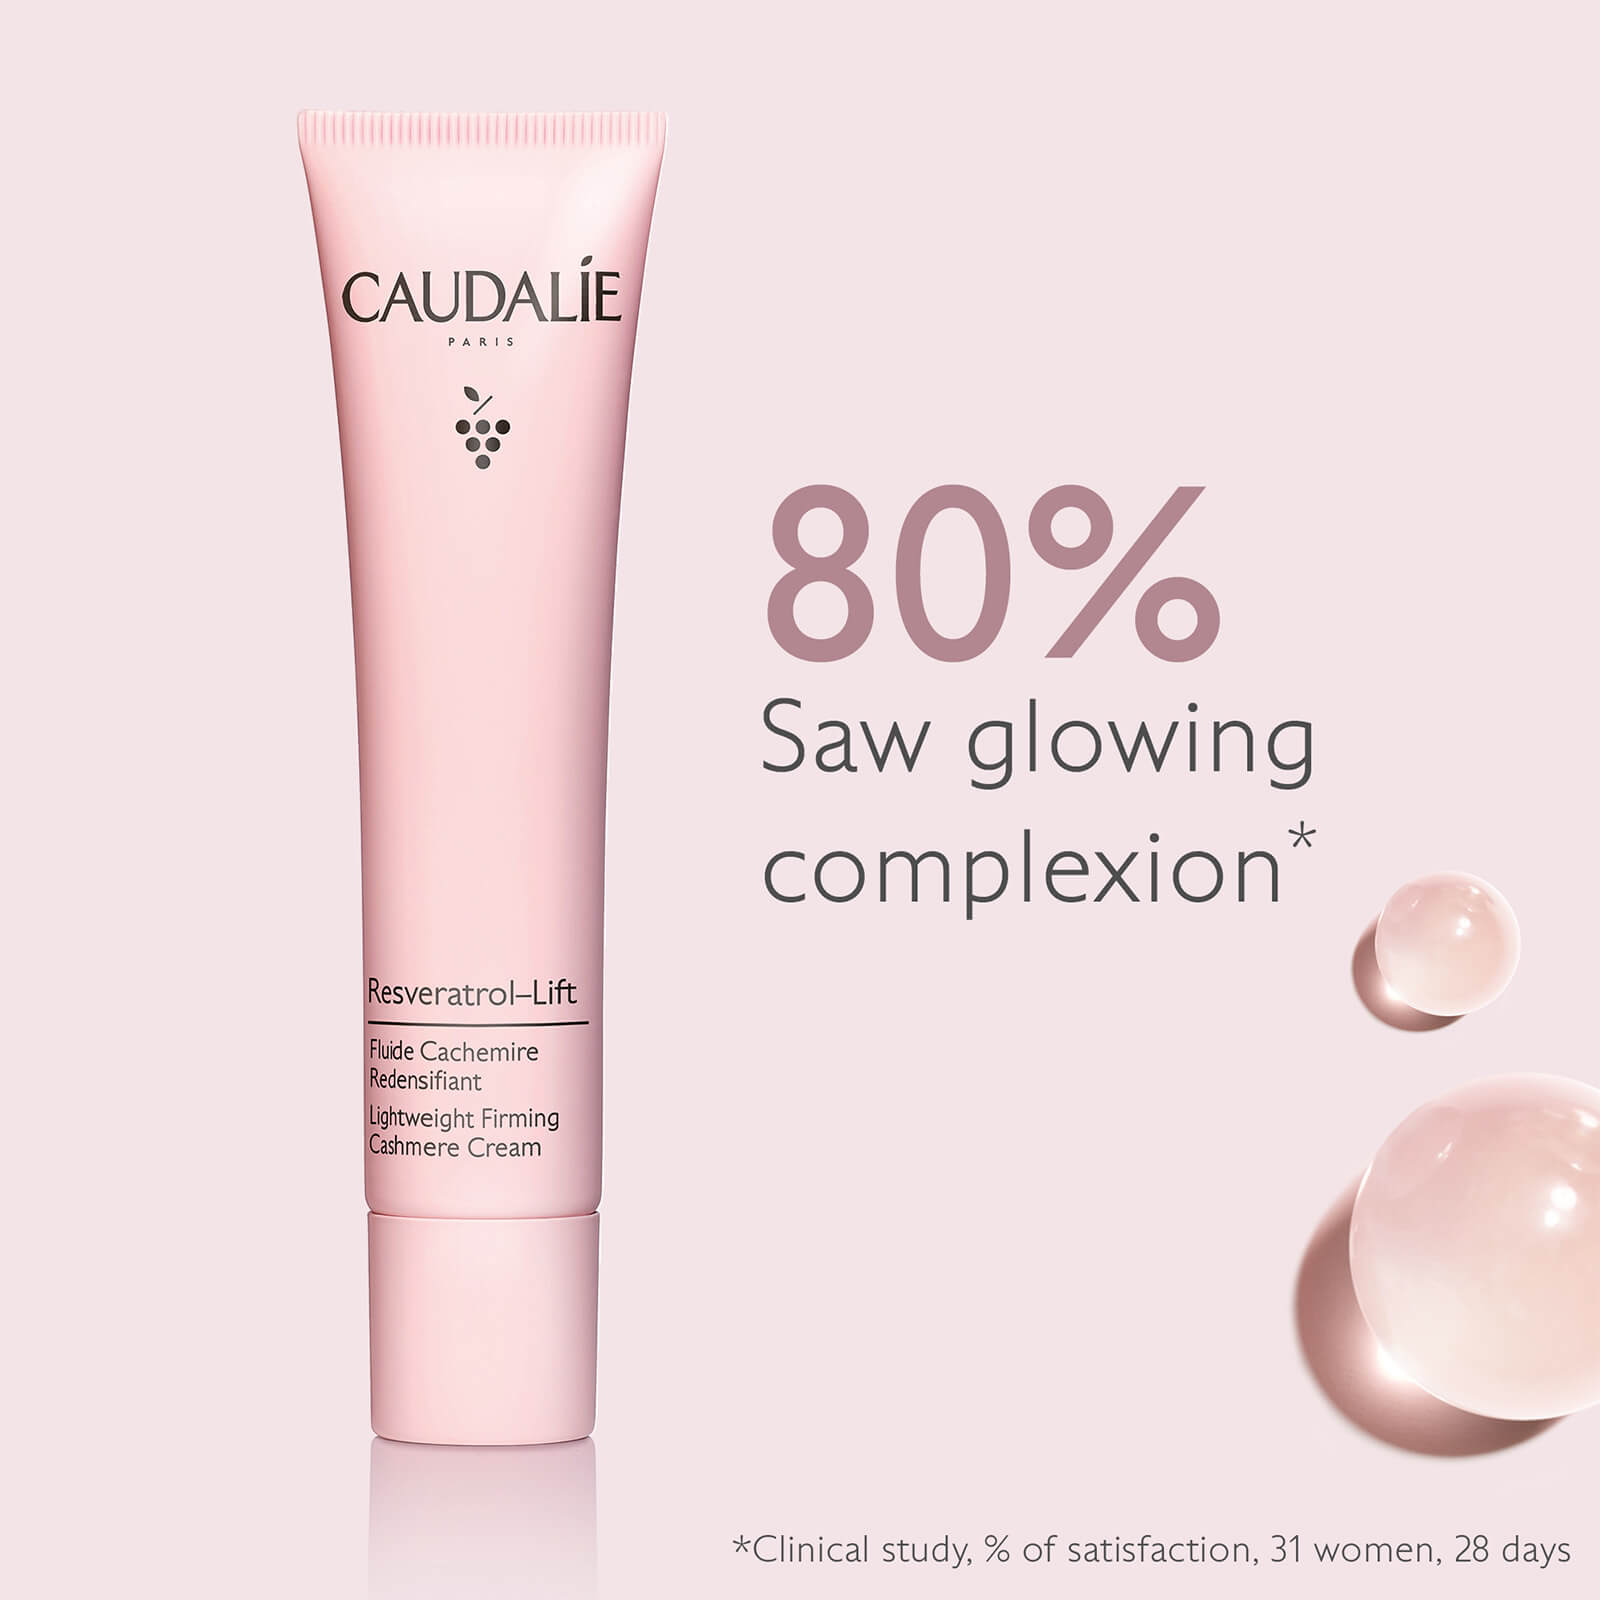 Image 1 -80% Saw glowing complexion* *Clinical study, % of satisfaction, 31 women, 28 days